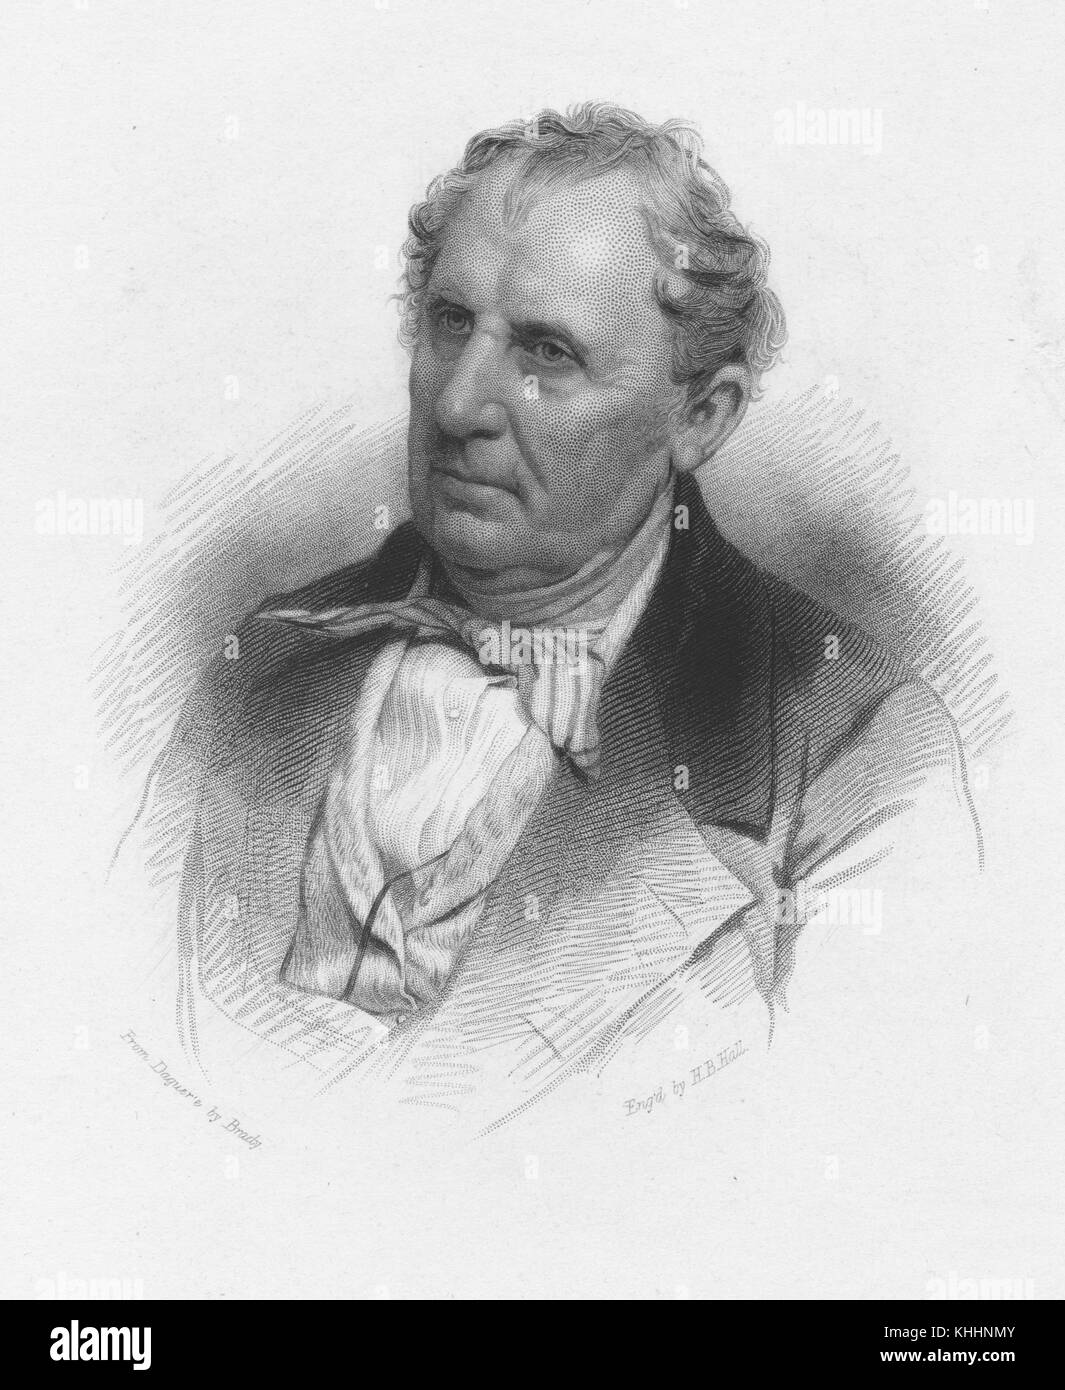 Engraved portrait of James Fenimore Cooper, author of The Last of the Mohicans, by HB Hall from a daguerreotype by Brady, 1900. From the New York Public Library. Stock Photo